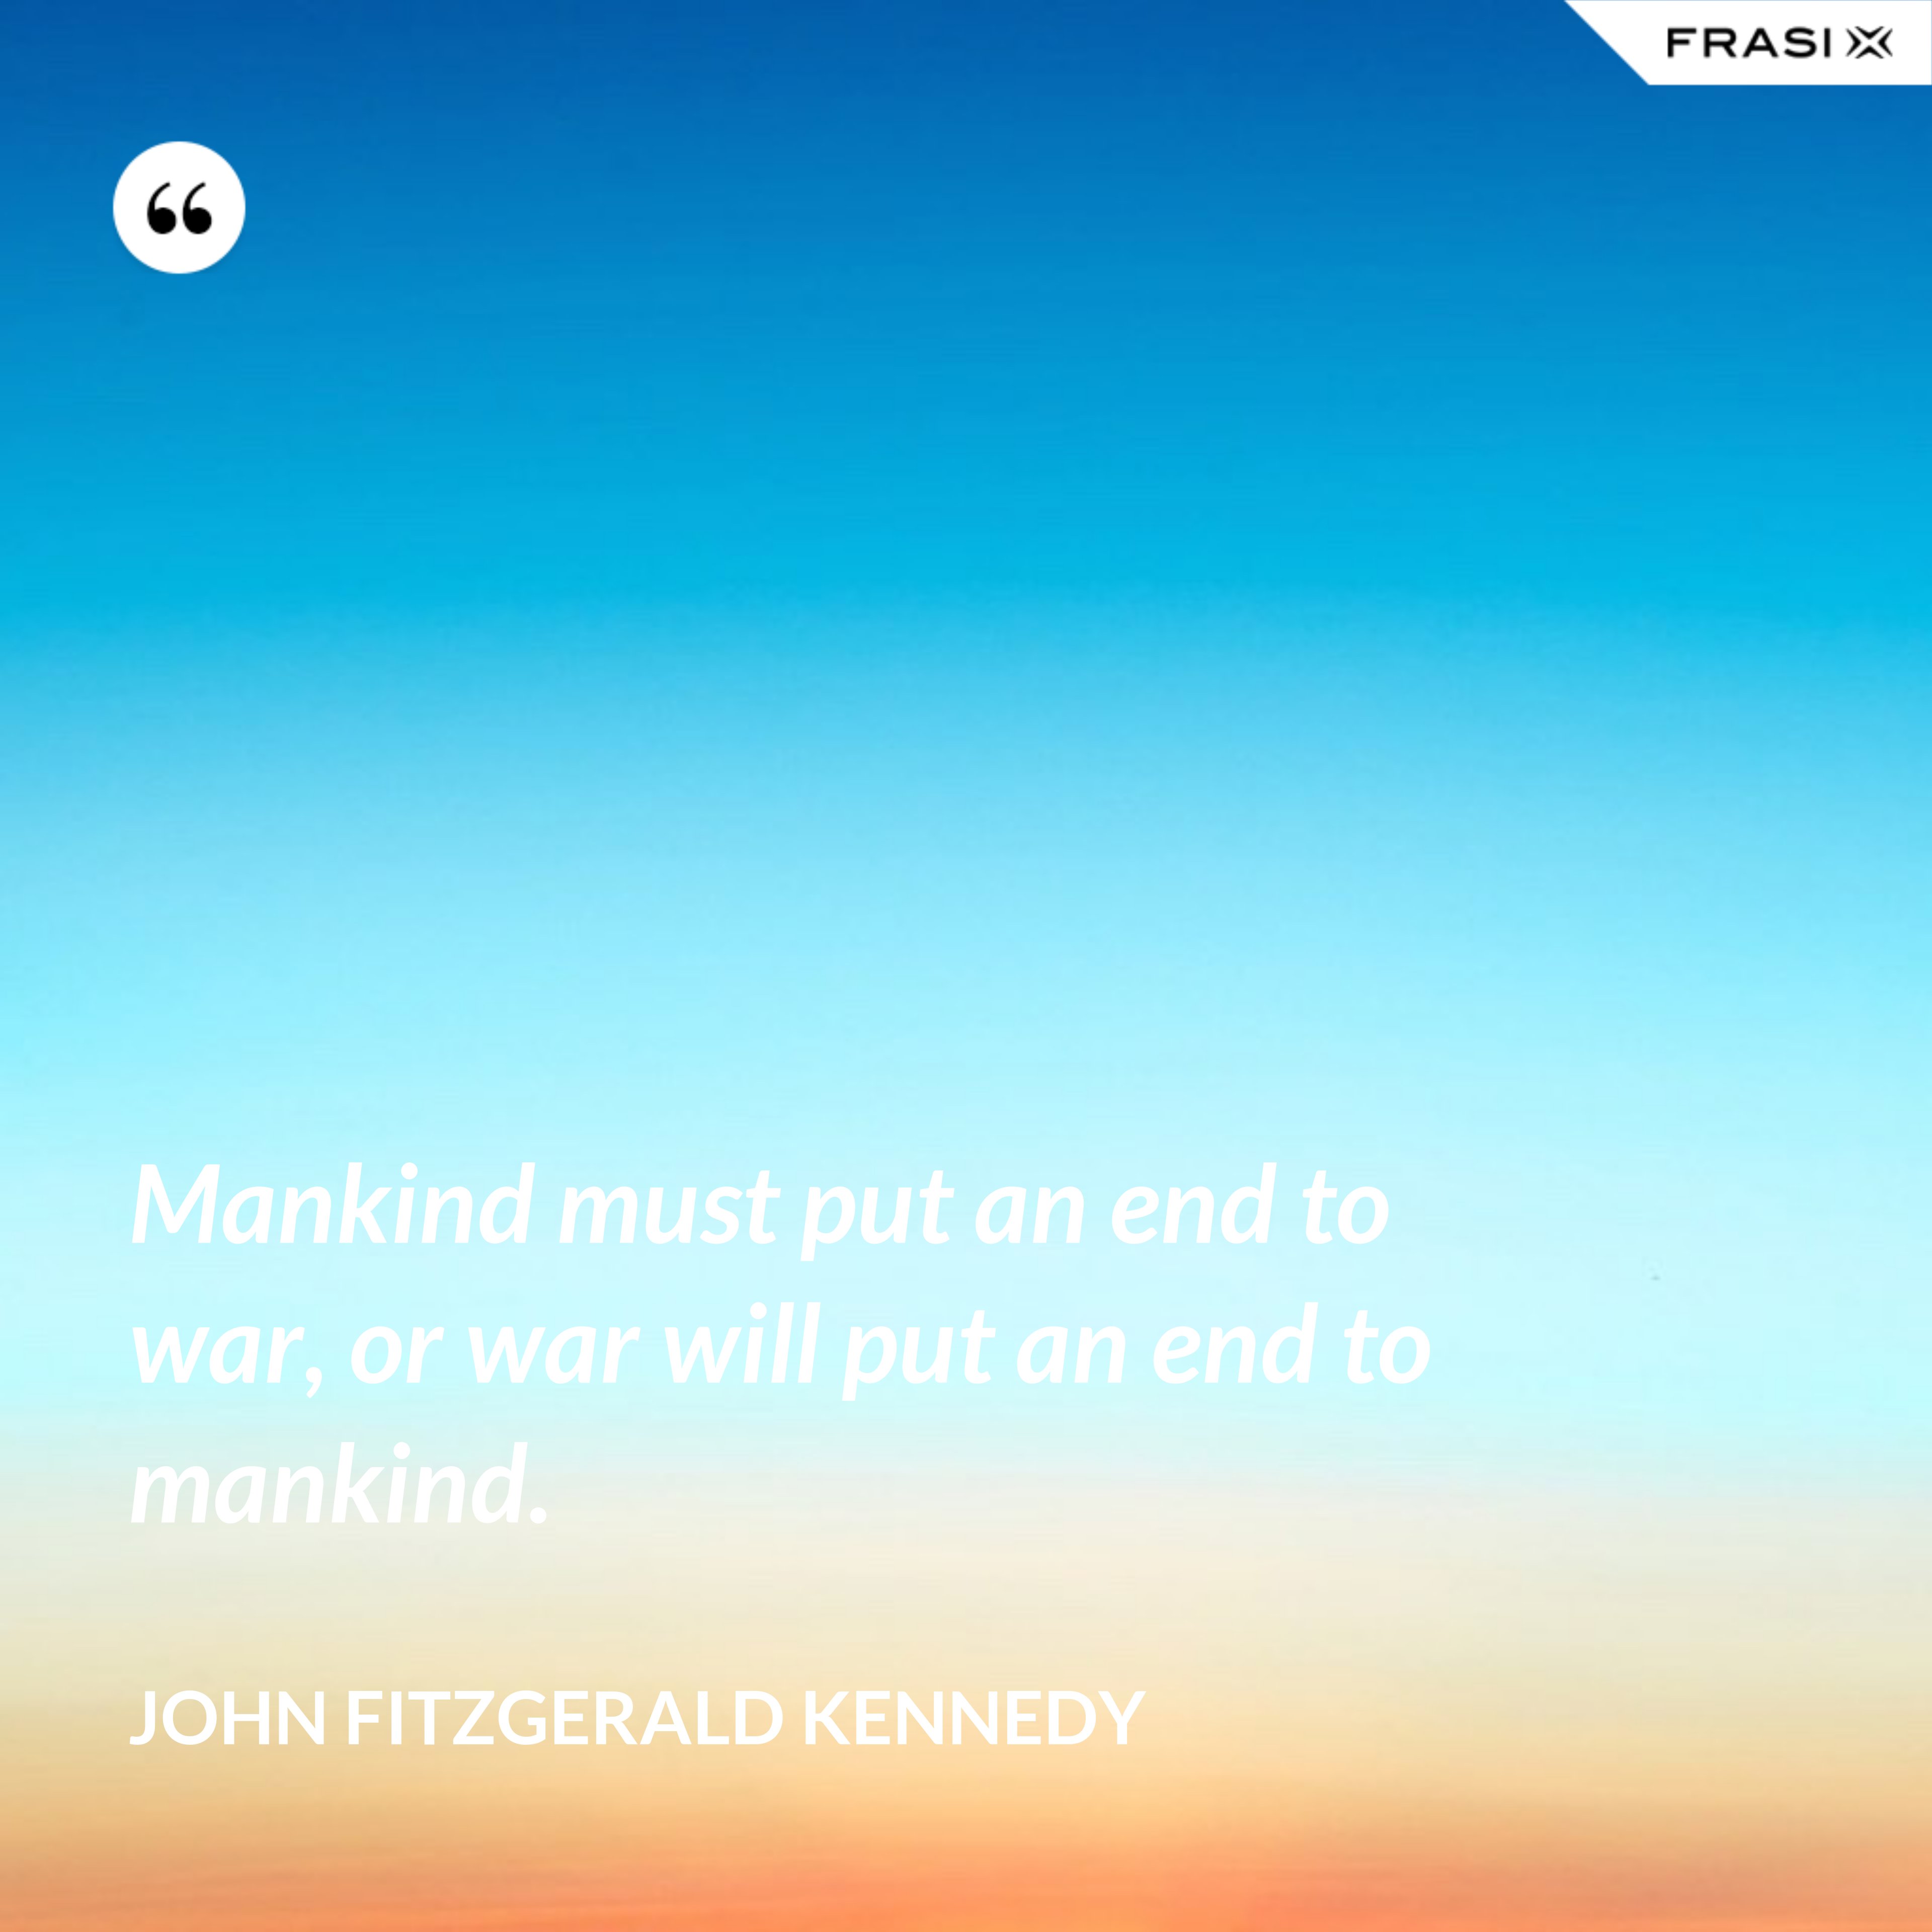 Mankind must put an end to war, or war will put an end to mankind. - John Fitzgerald Kennedy